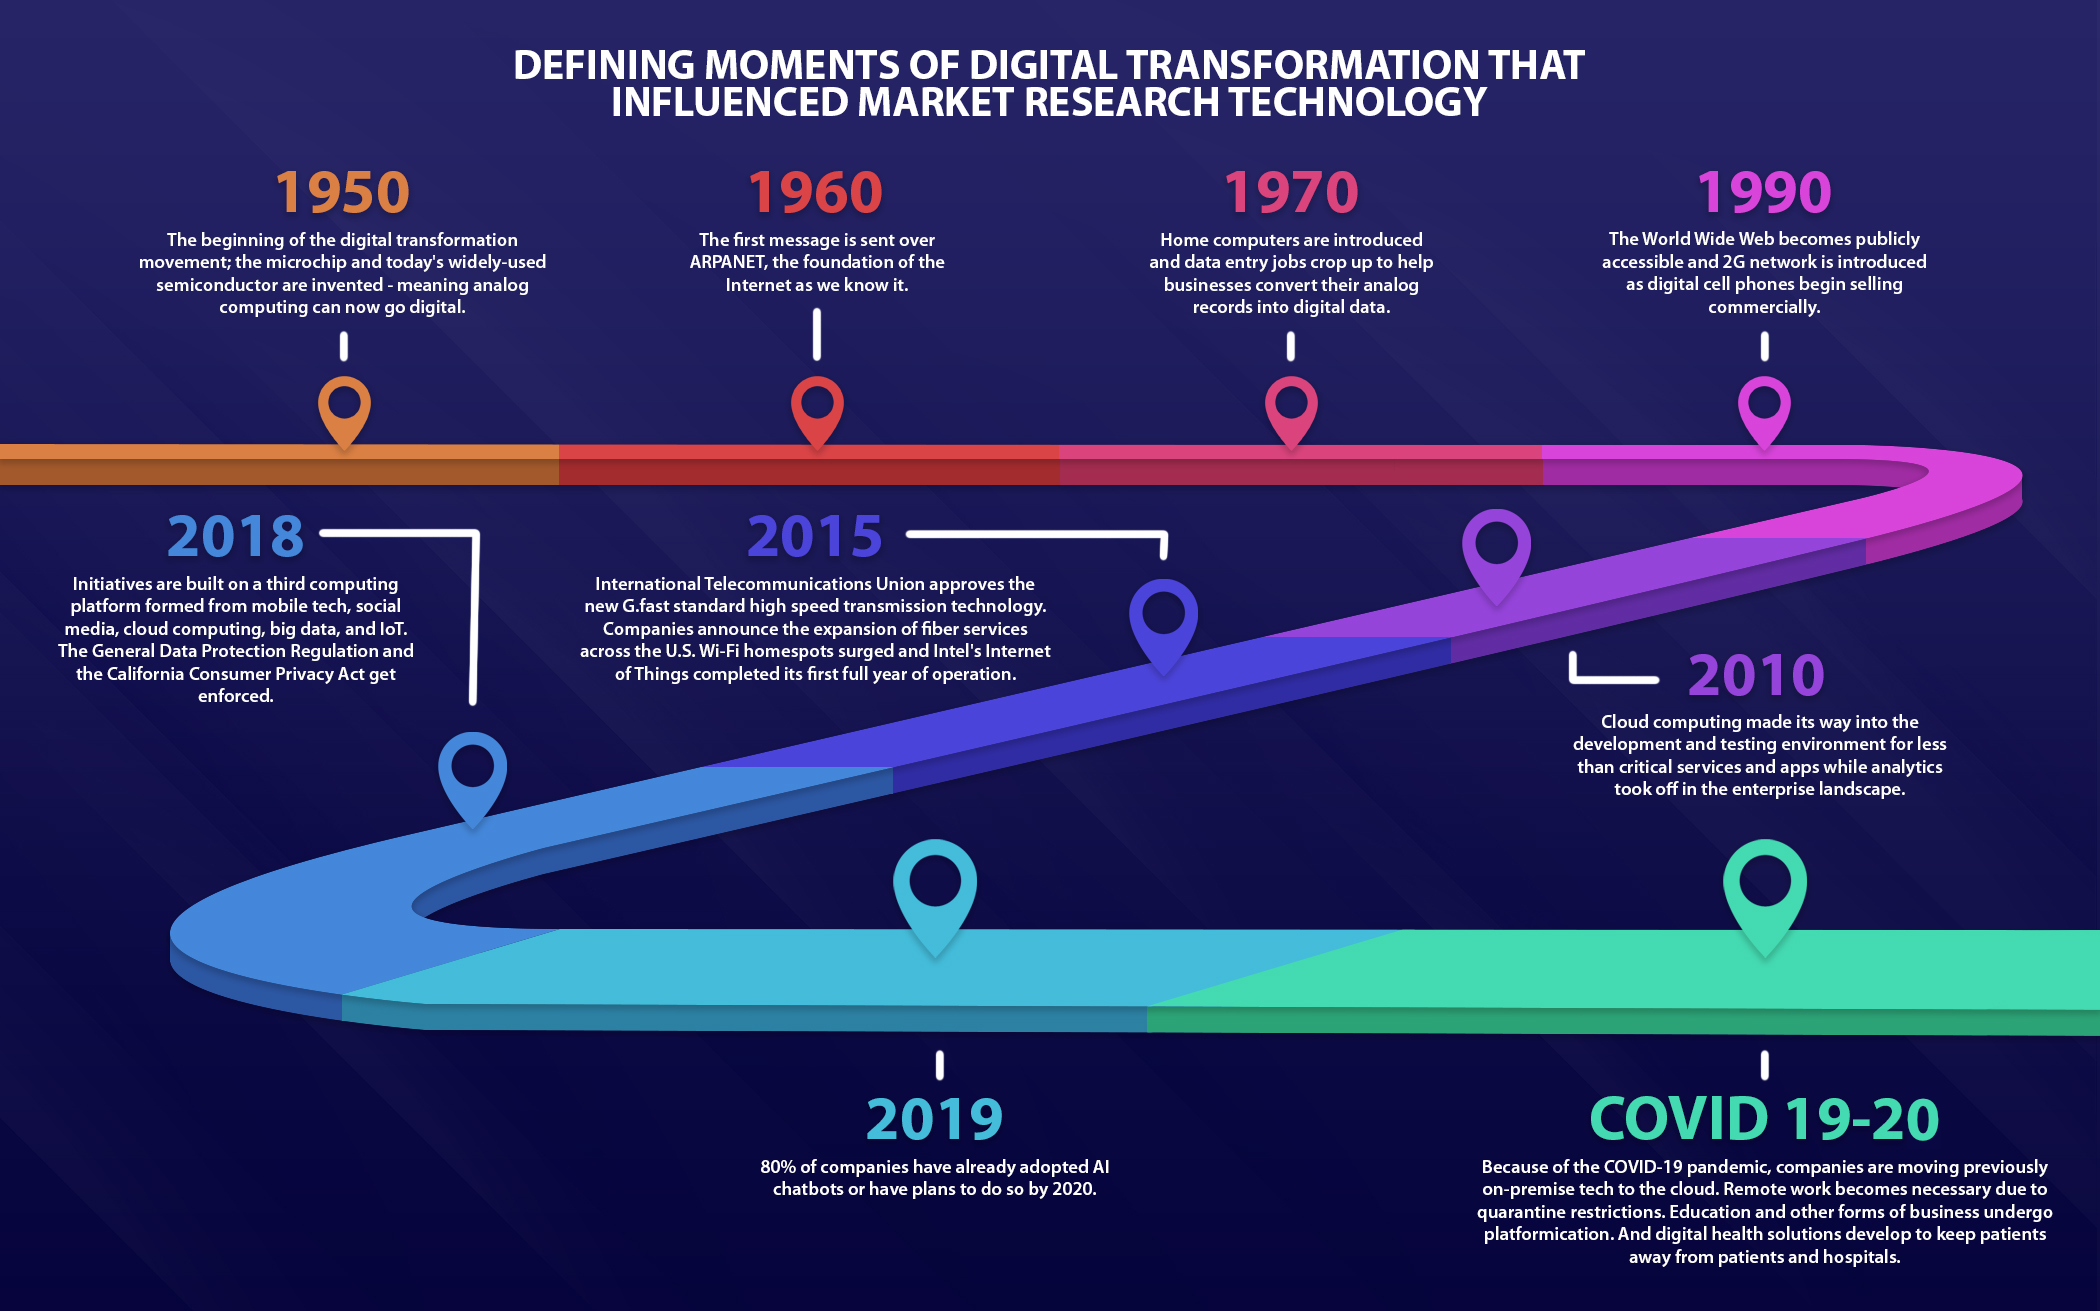 Defining Moments of Digital Transformation that Influenced Marketing Research Technology